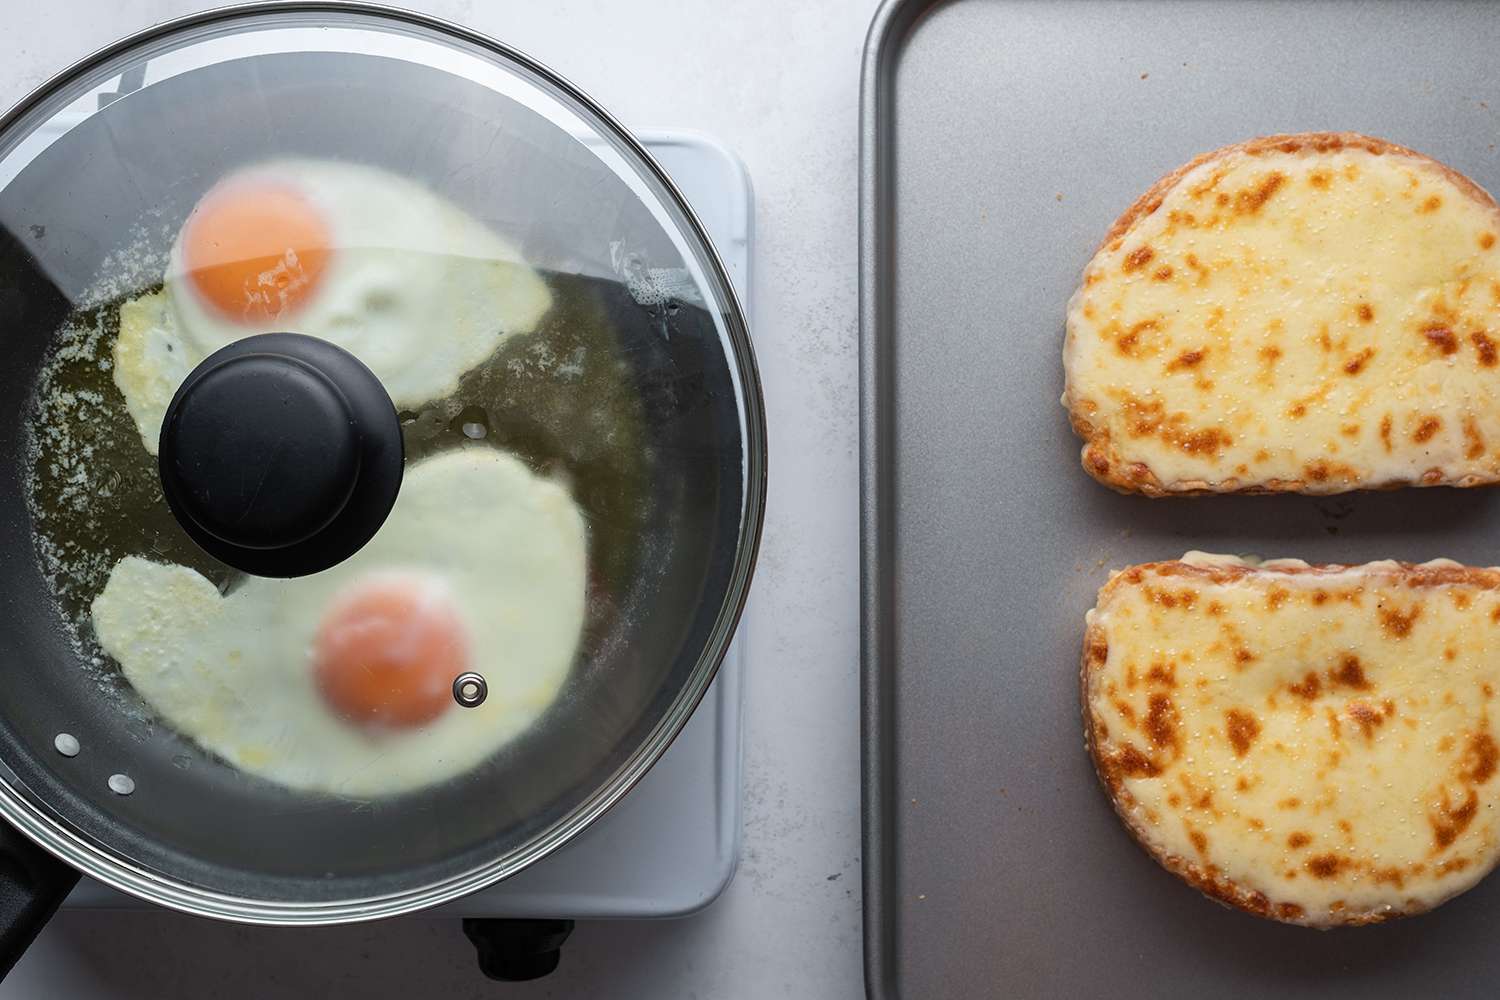 Eggs cooking in a covered pan on a burner, and two sandwiches on a sheet pan 